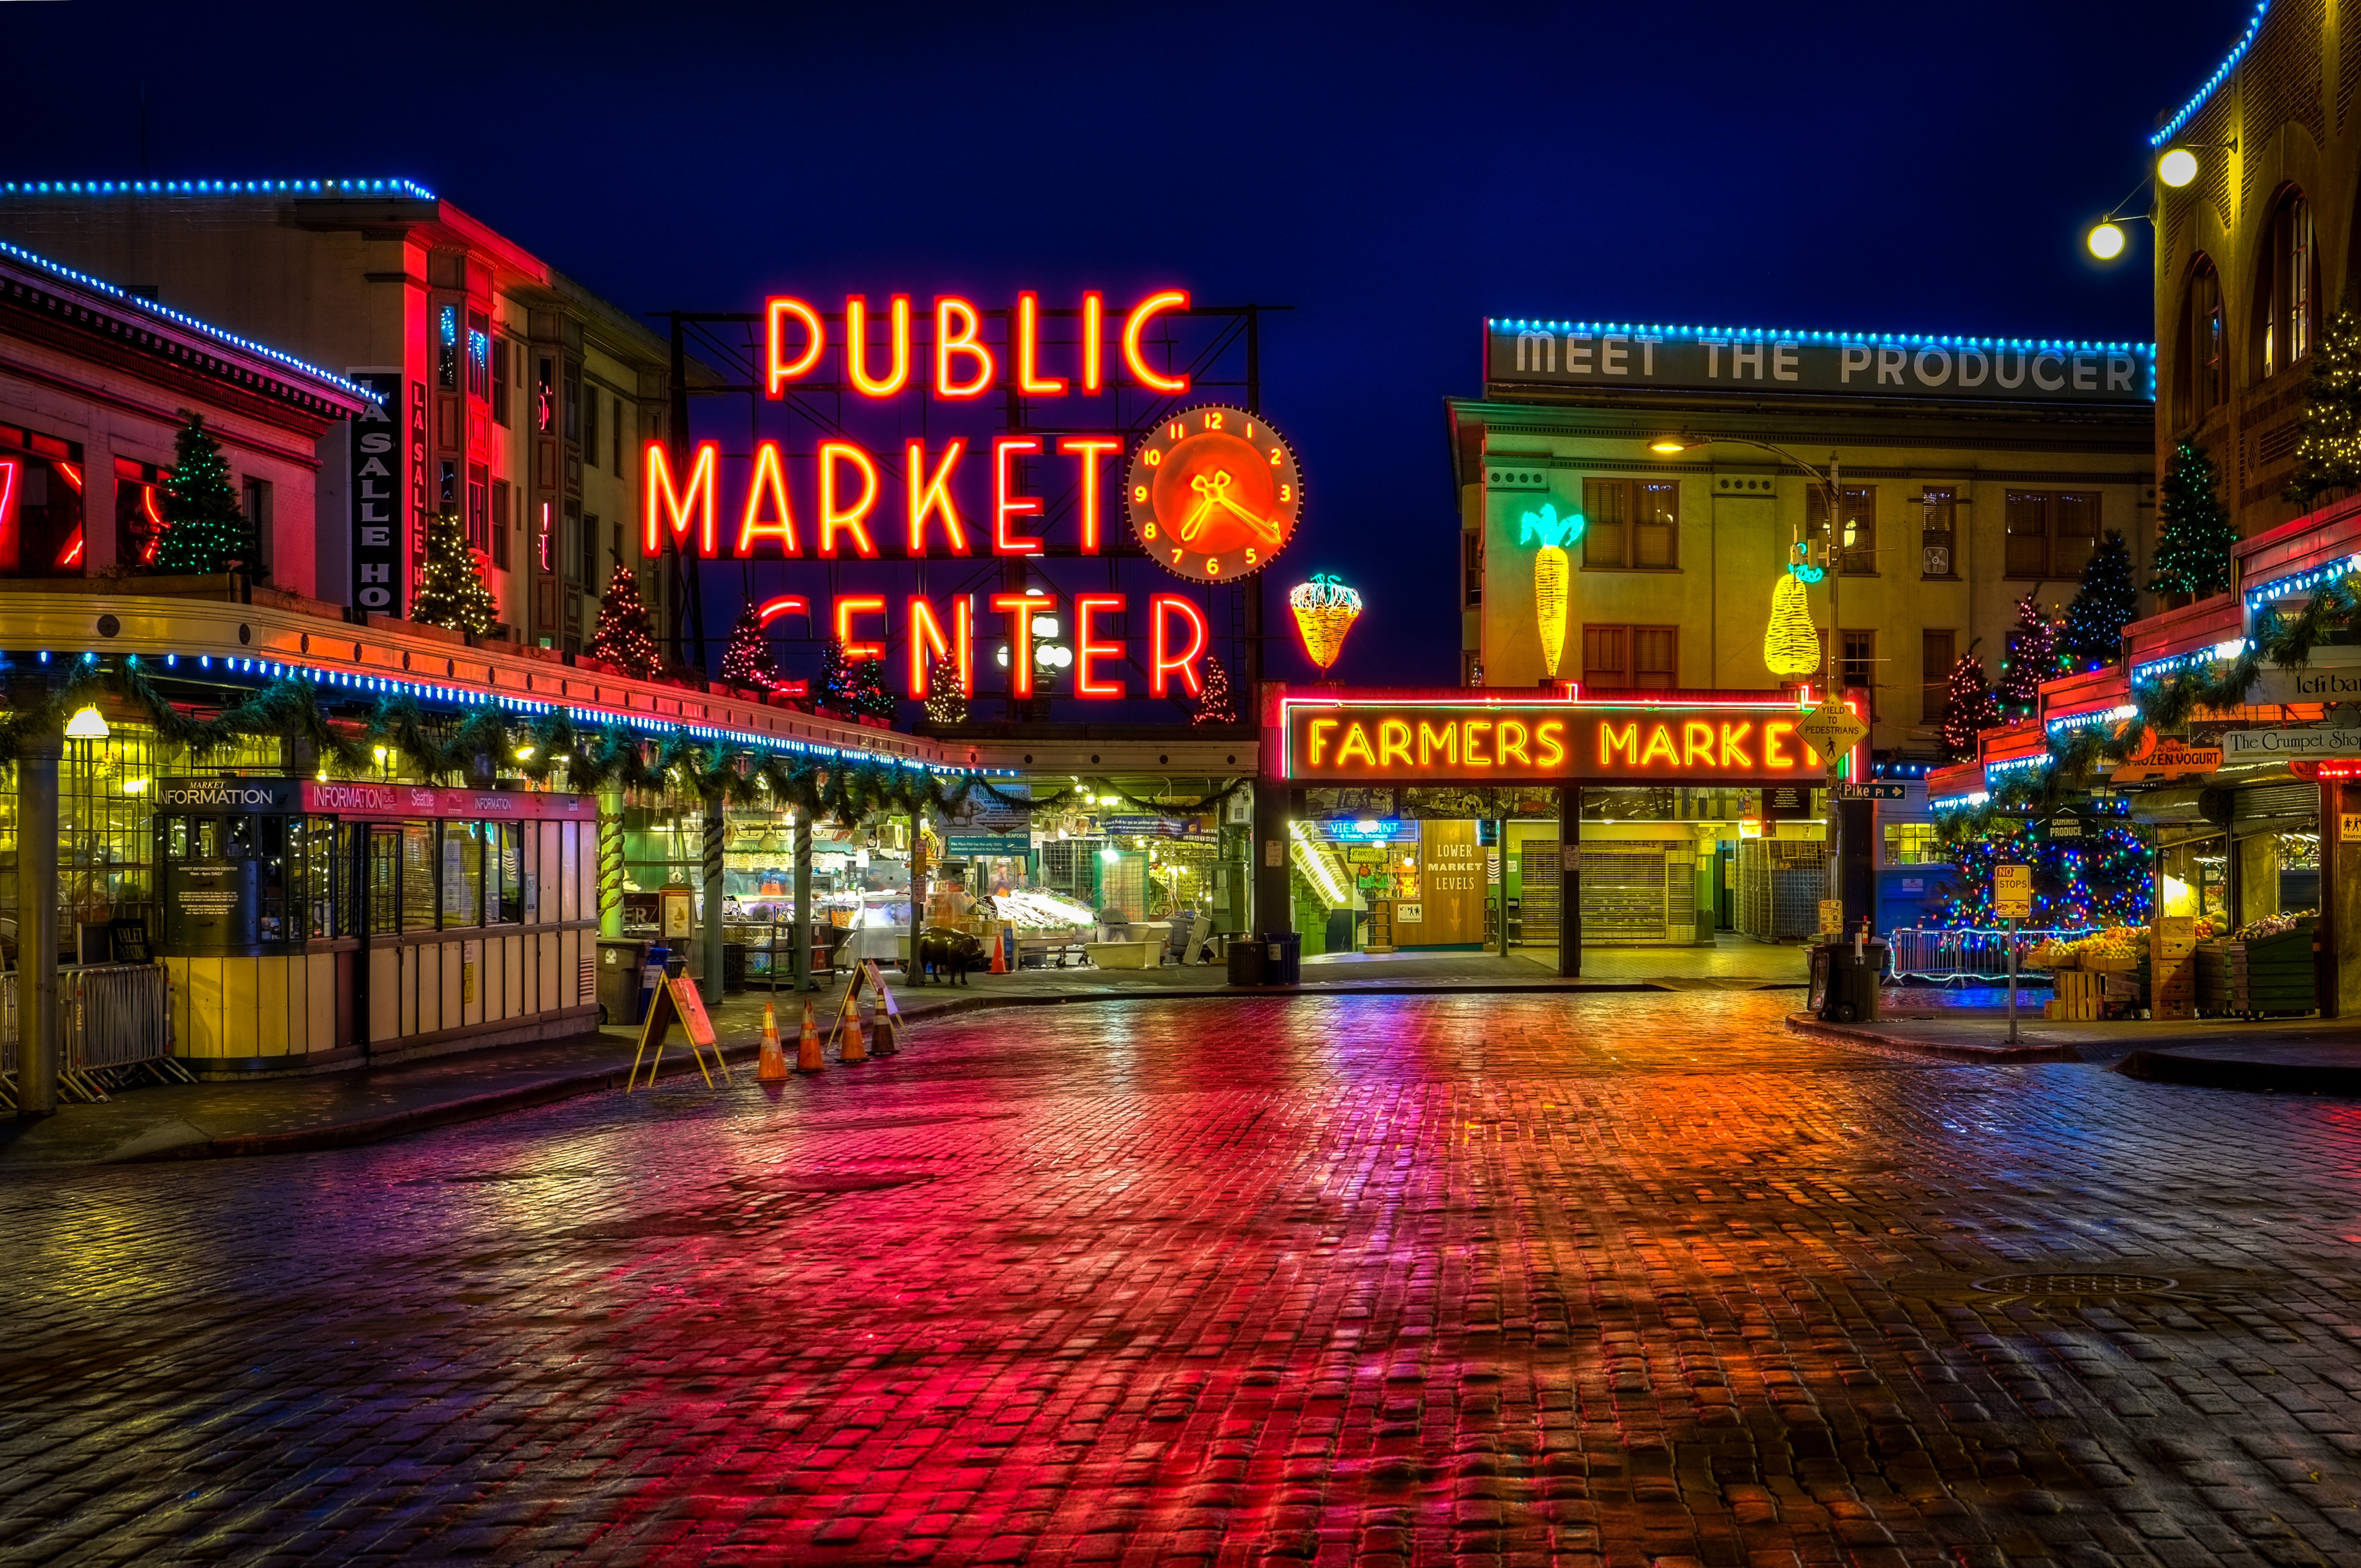 Latest travel itineraries for Pike Place Fish Market in December (updated  in 2023), Pike Place Fish Market reviews, Pike Place Fish Market address  and opening hours, popular attractions, hotels, and restaurants near